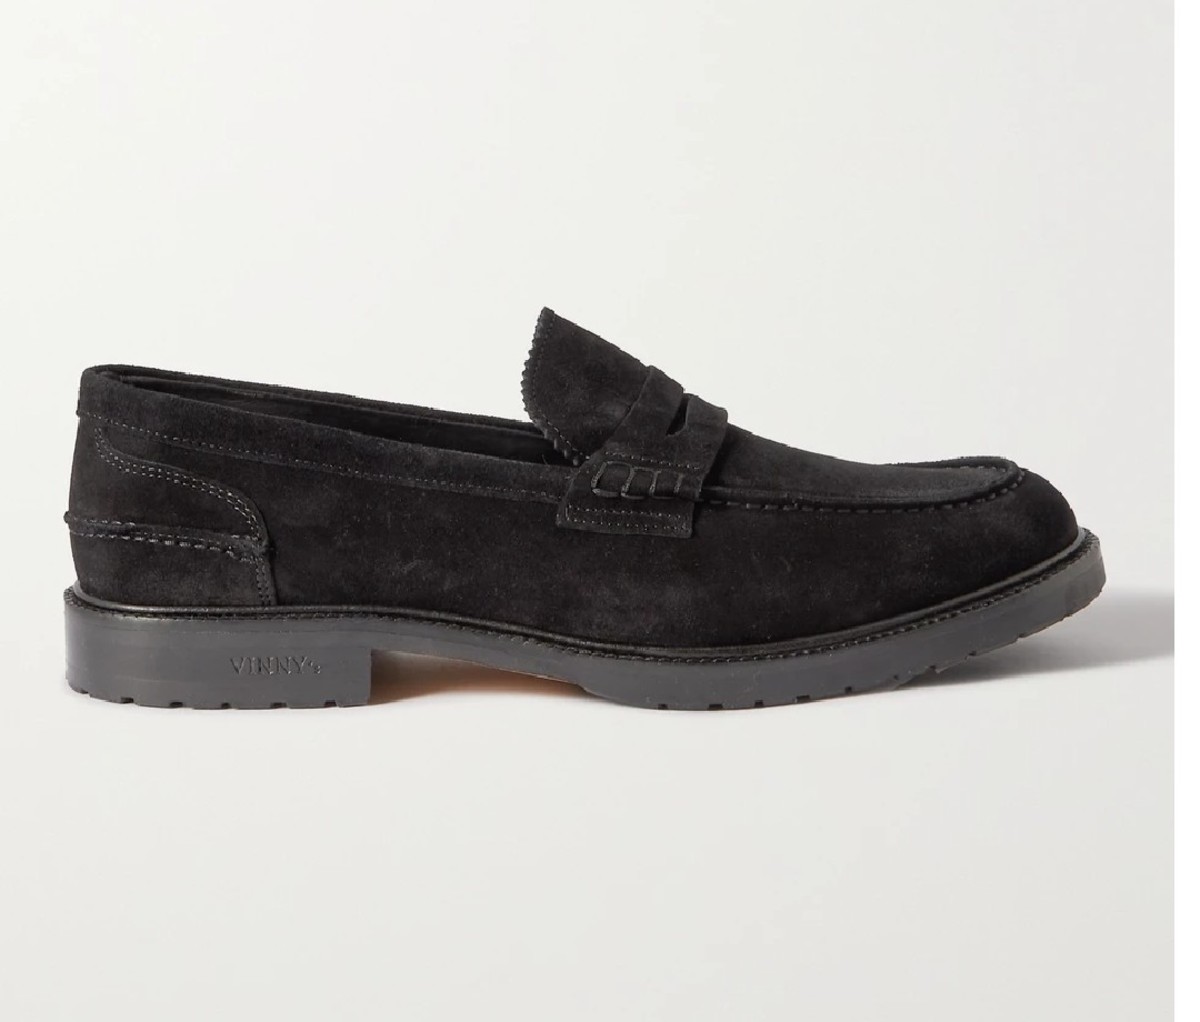 VINNY'S Grand Townee Suede Penny Loafer